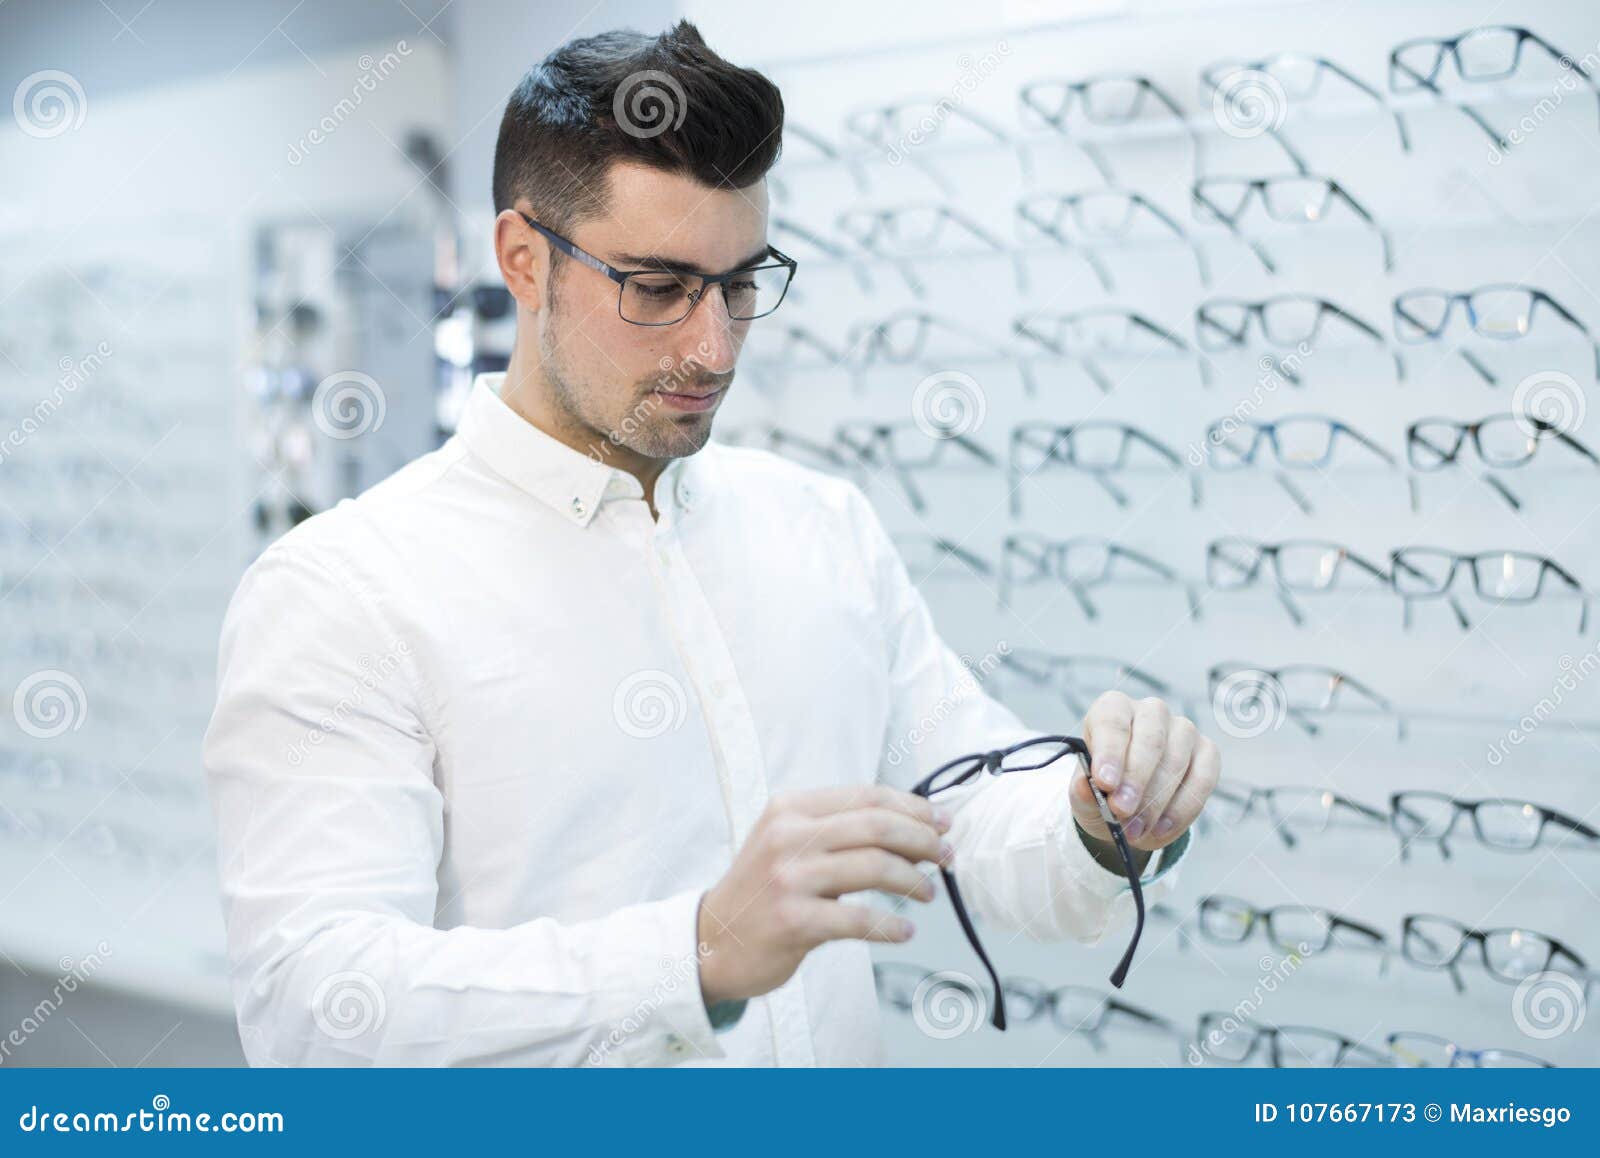 Serious Man Looking Glasses Frame in Store Stock Image - Image of ...